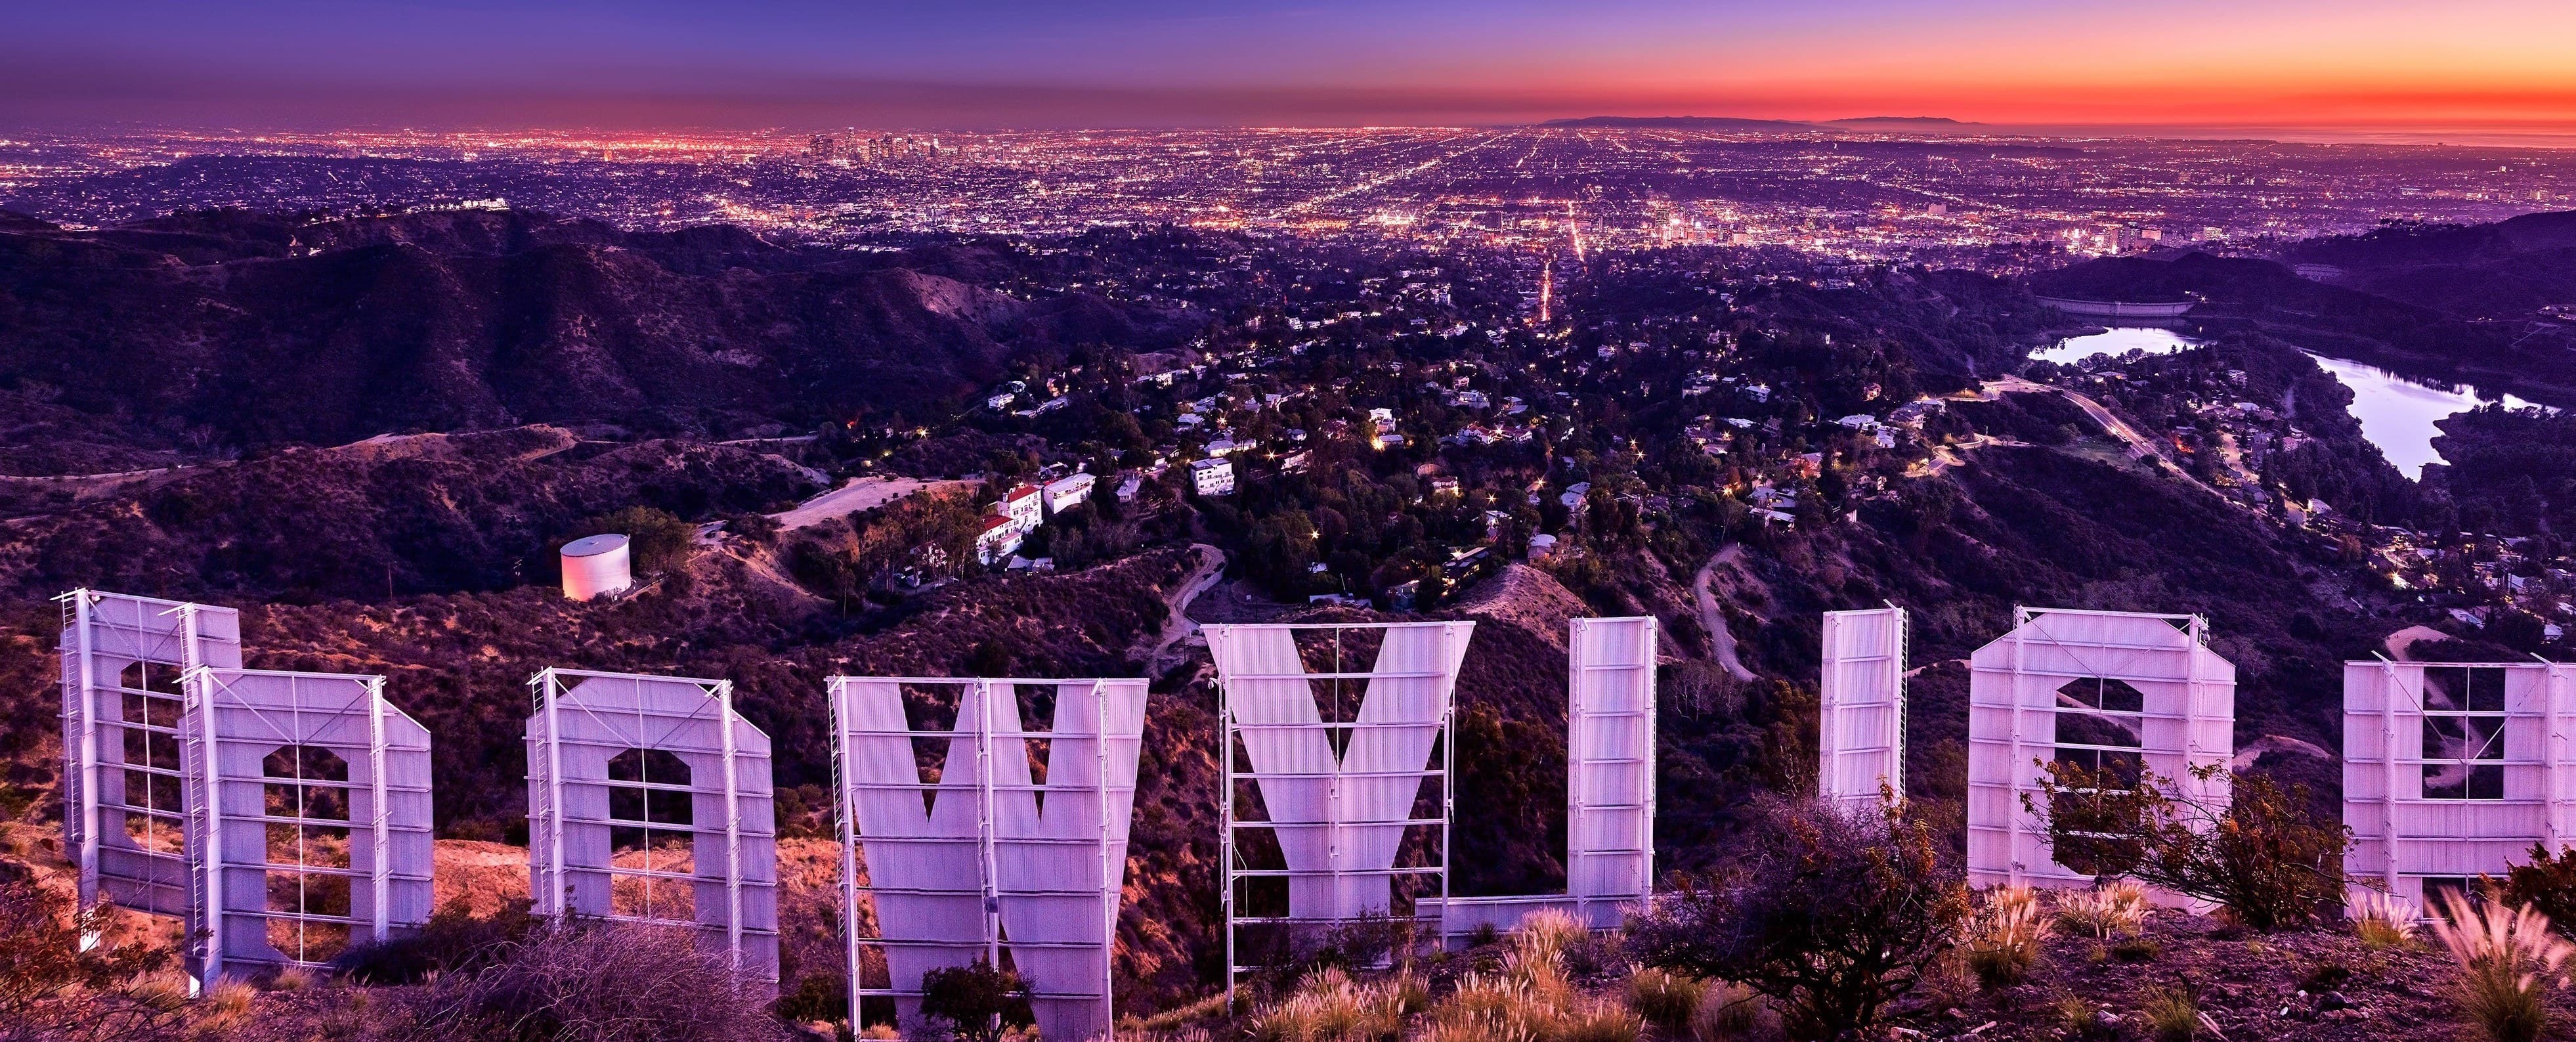 Los Angeles Hollywood Sign